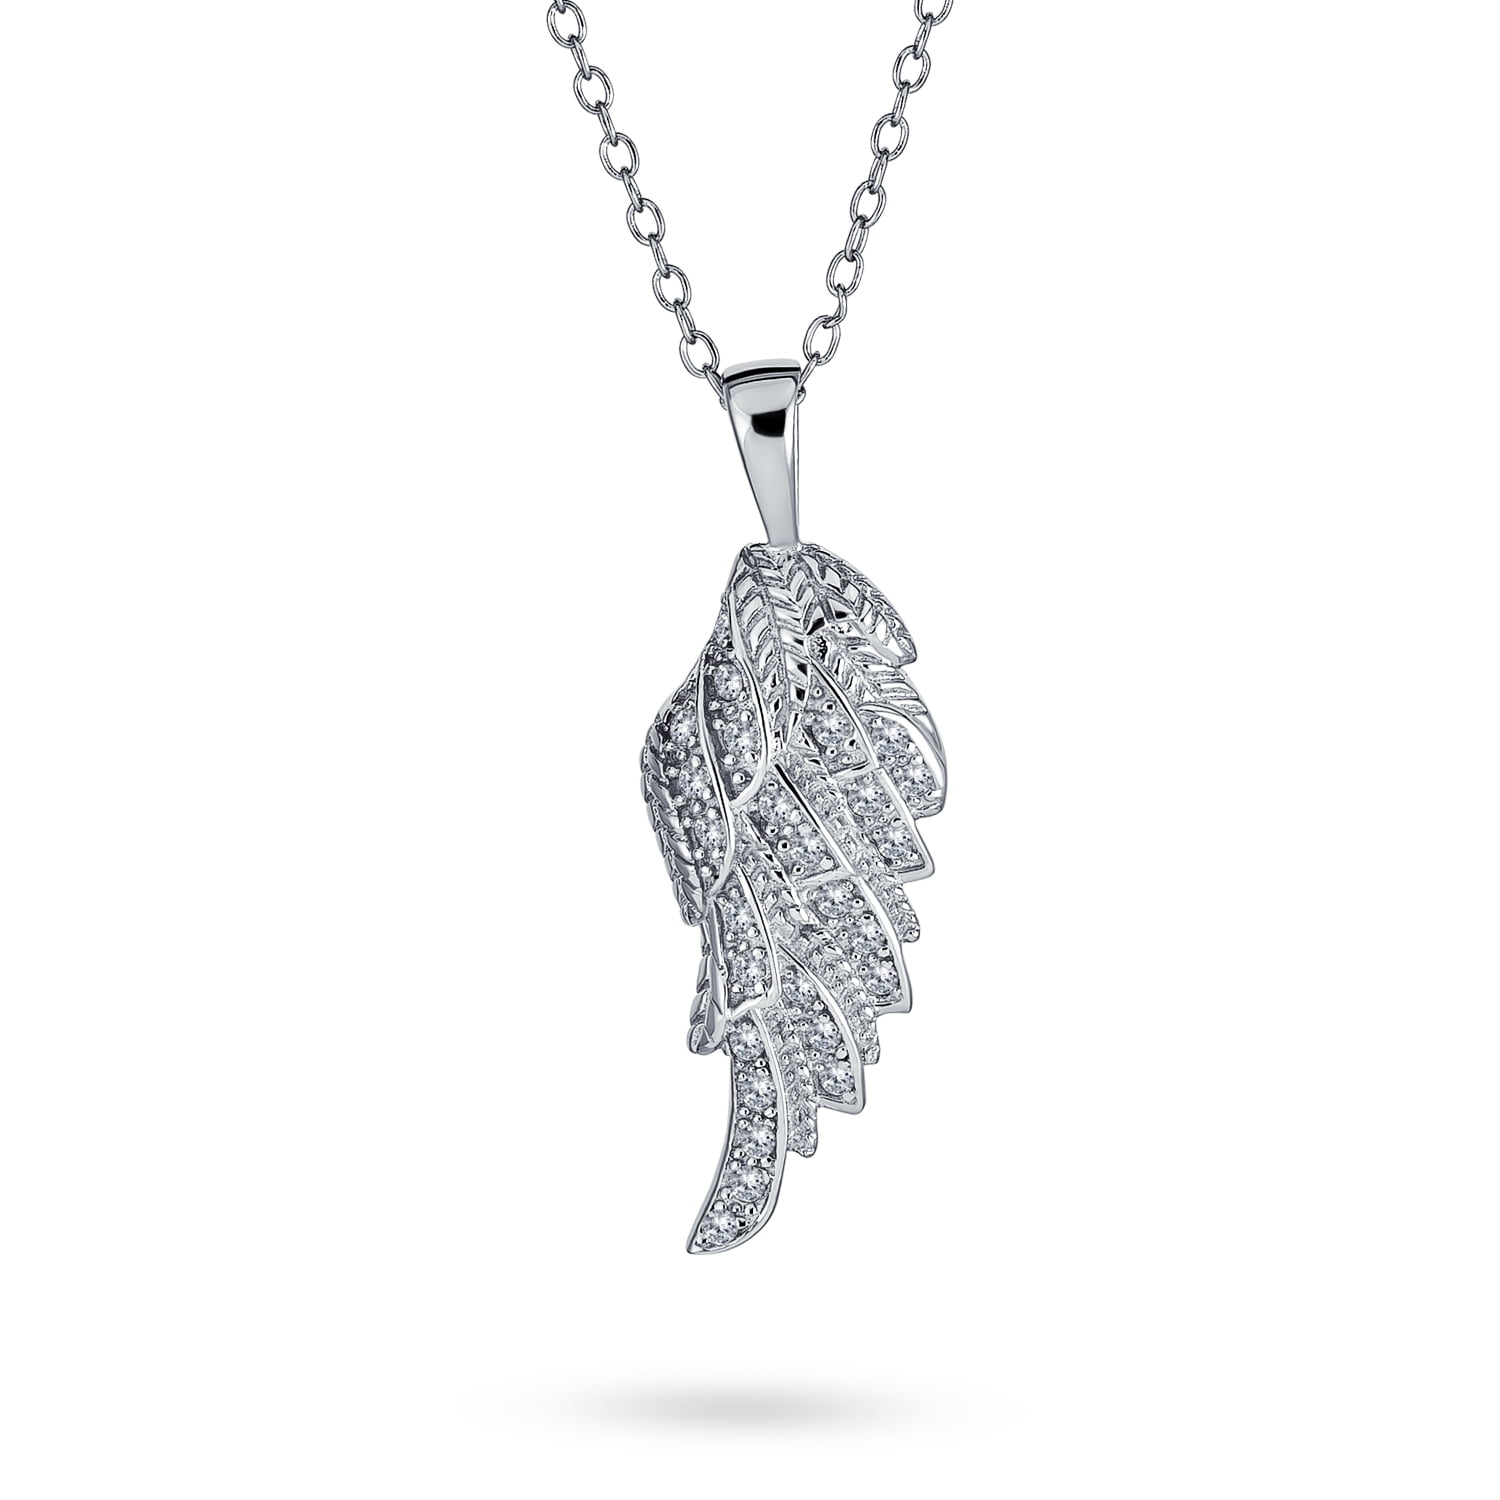 Diamond Angel Wing Pendant in 14ct Gold Plated 925 Sterling Silver